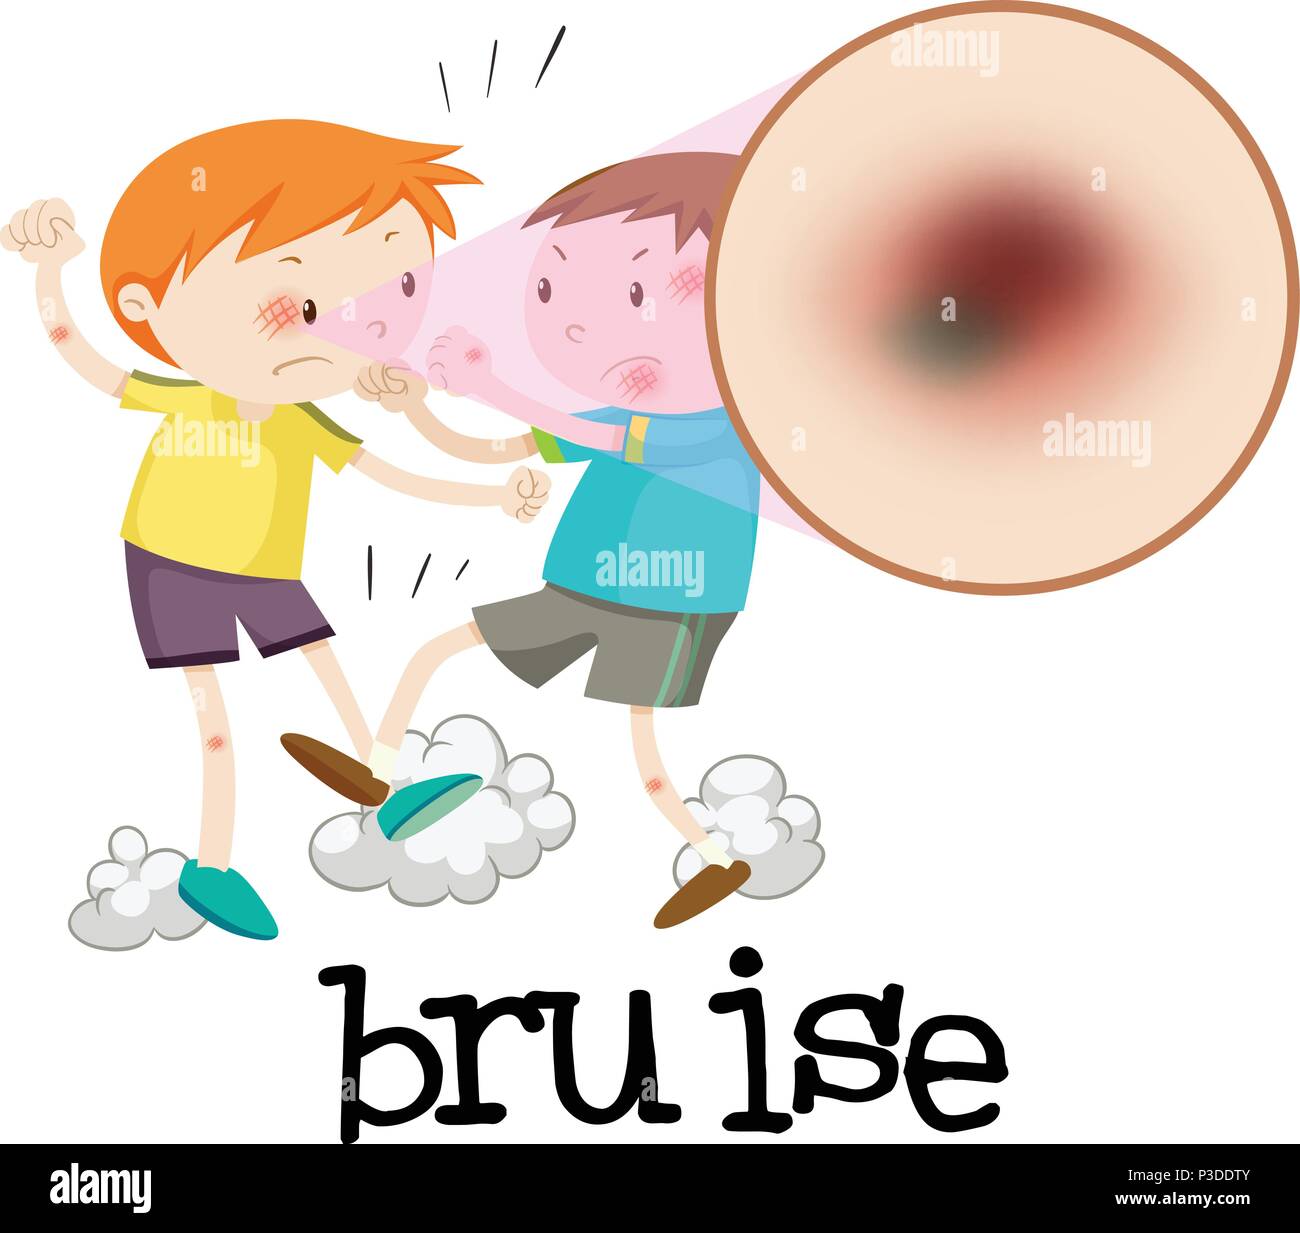 Boys Fighting and Having Bruise illustration Stock Vector